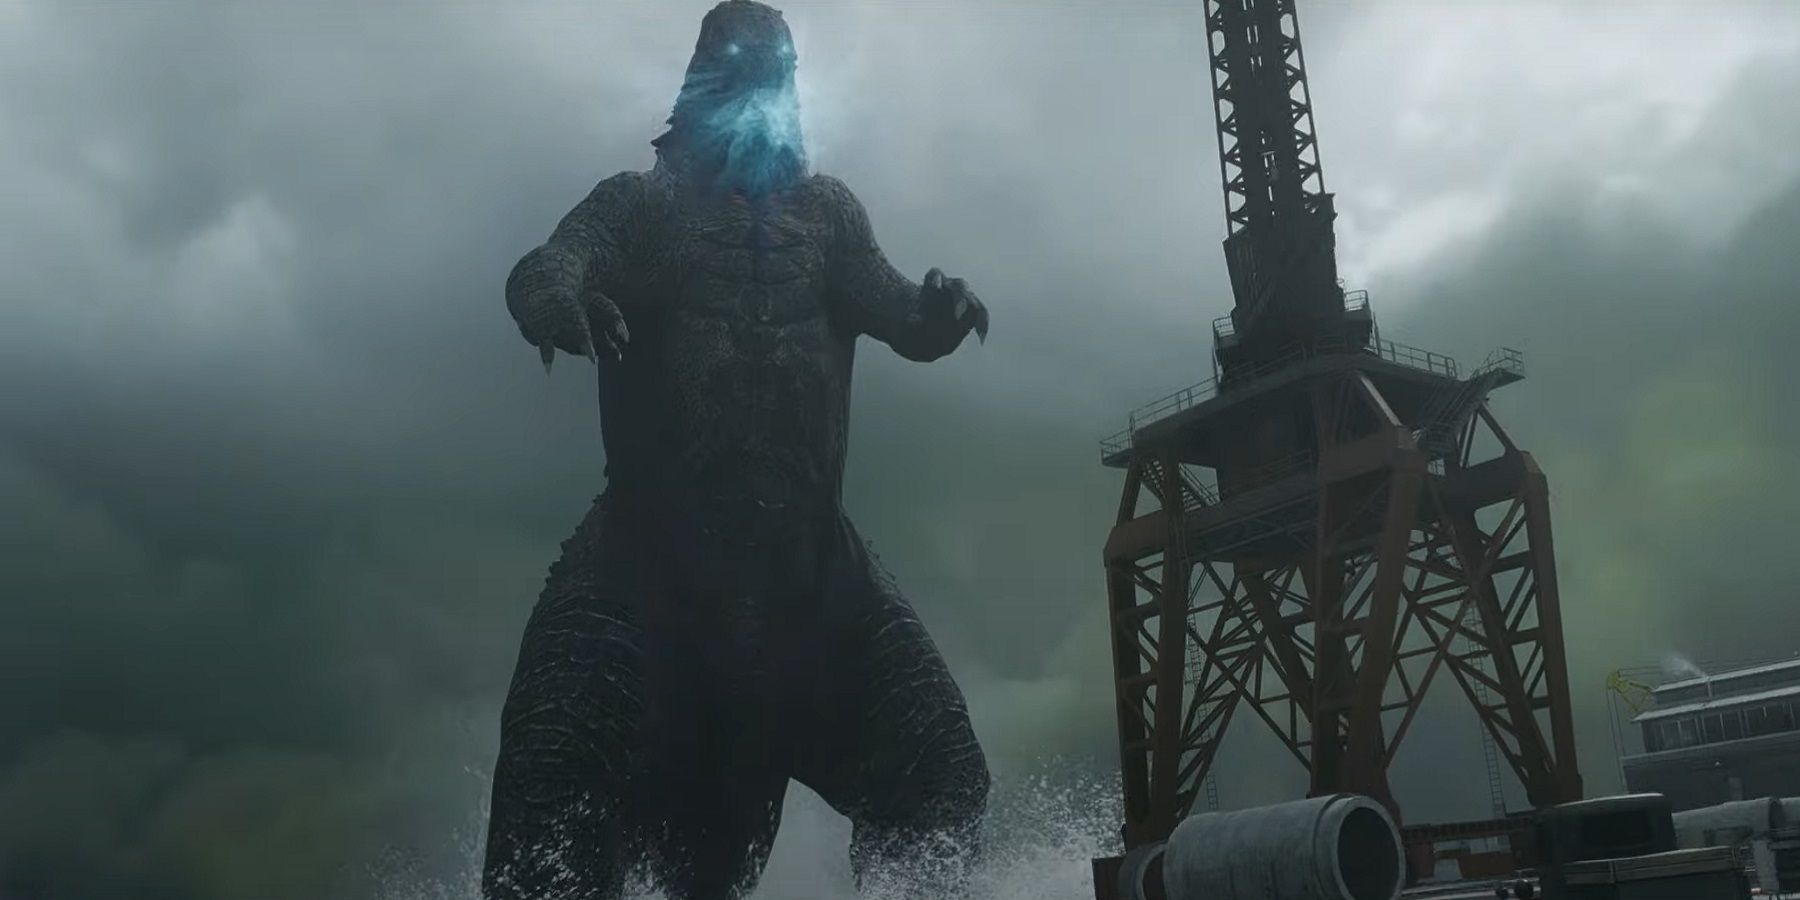 Players get their first glimpse of Kong and Godzilla's invasion of Caldera in Call of Duty: Warzone.